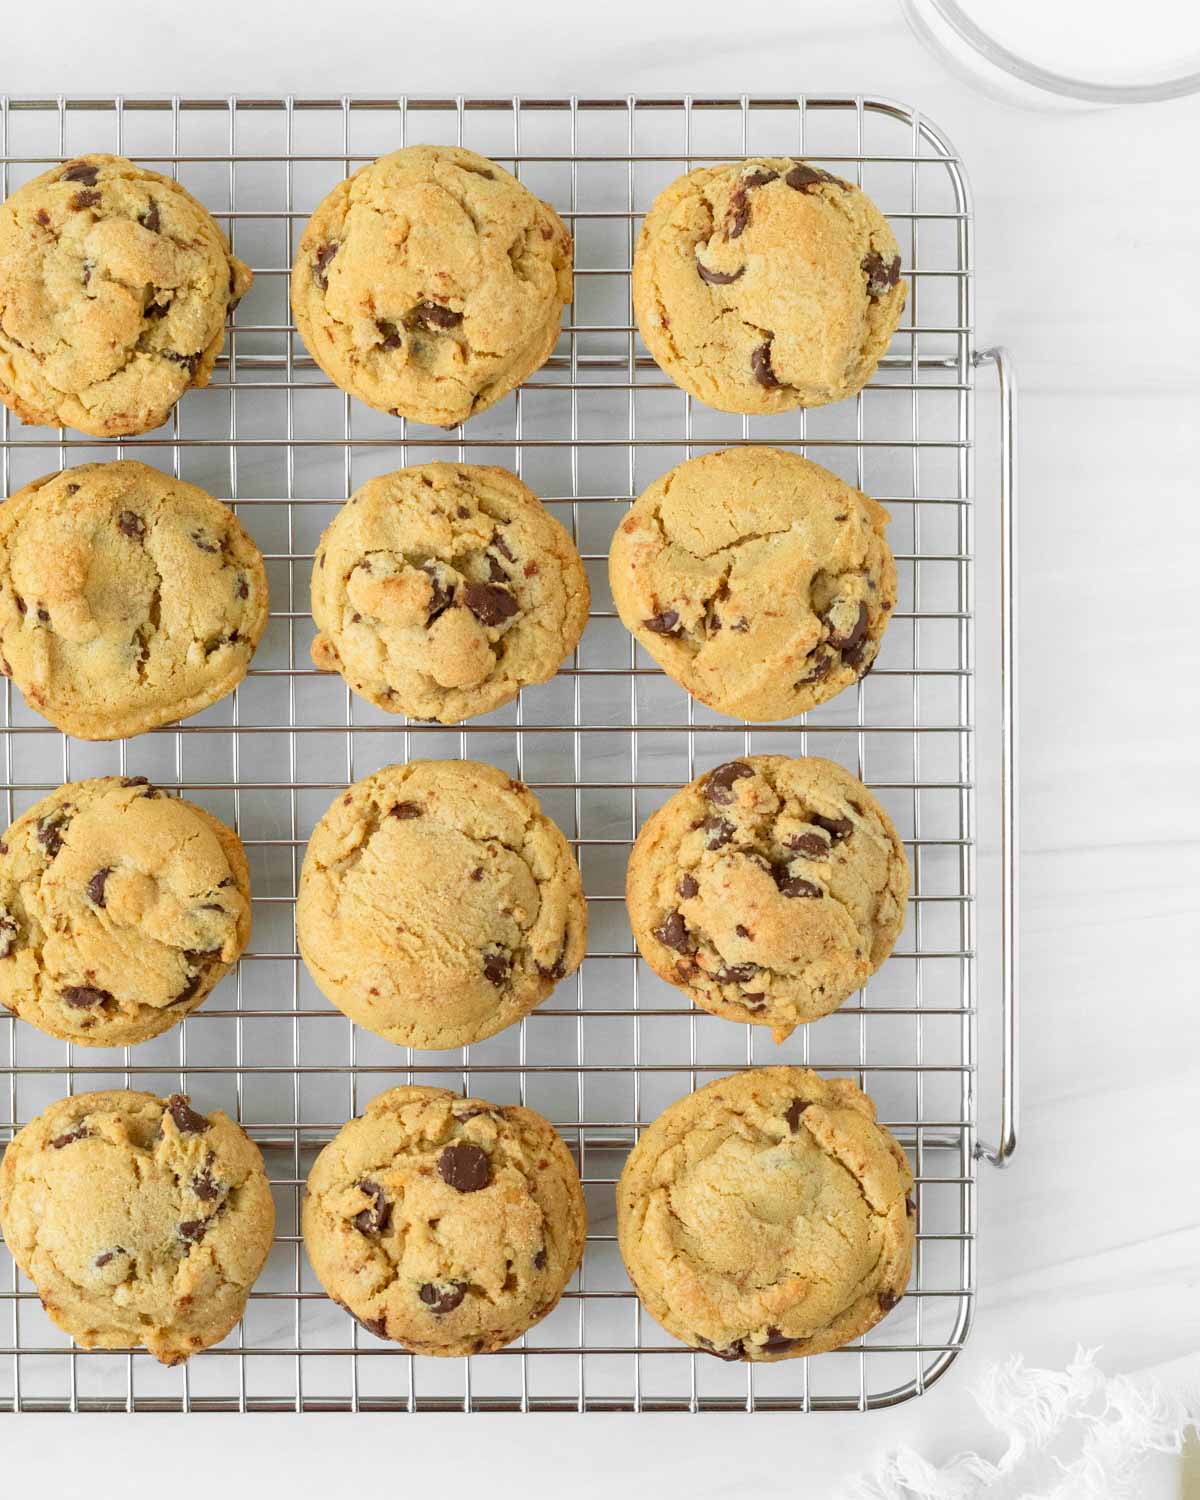 These chewy chocolate chip cookies are the best chocolate chip cookies made with classic ingredients for a cookie that has the perfect chewy texture.